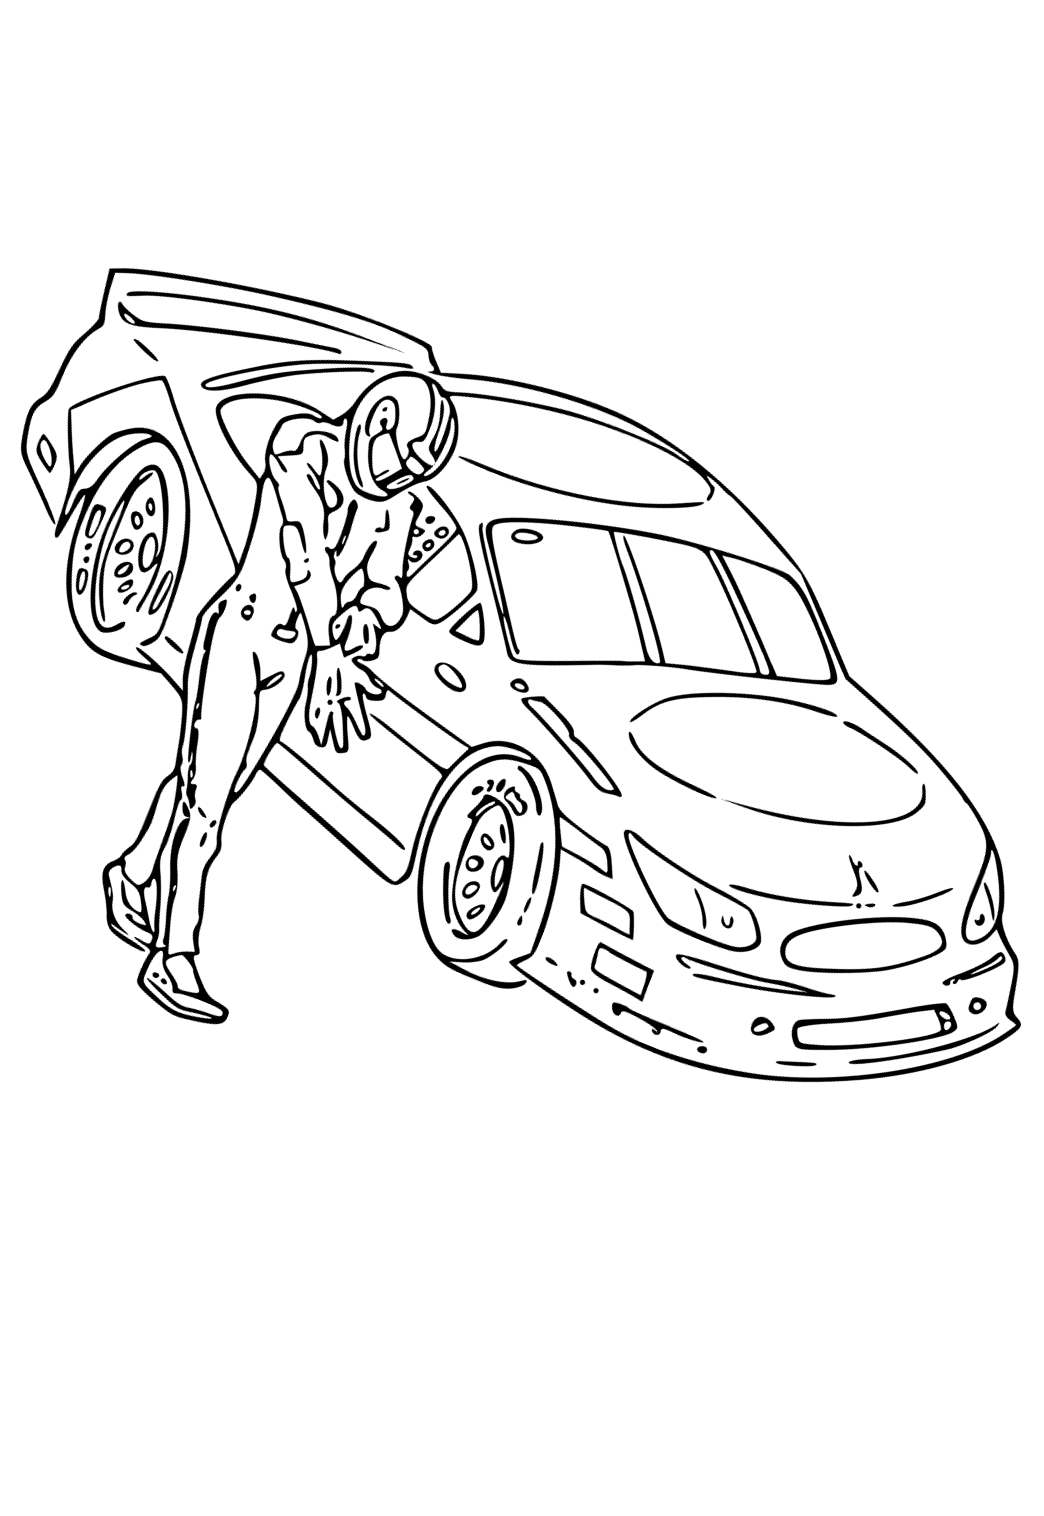 Free printable nascar pilot coloring page for adults and kids